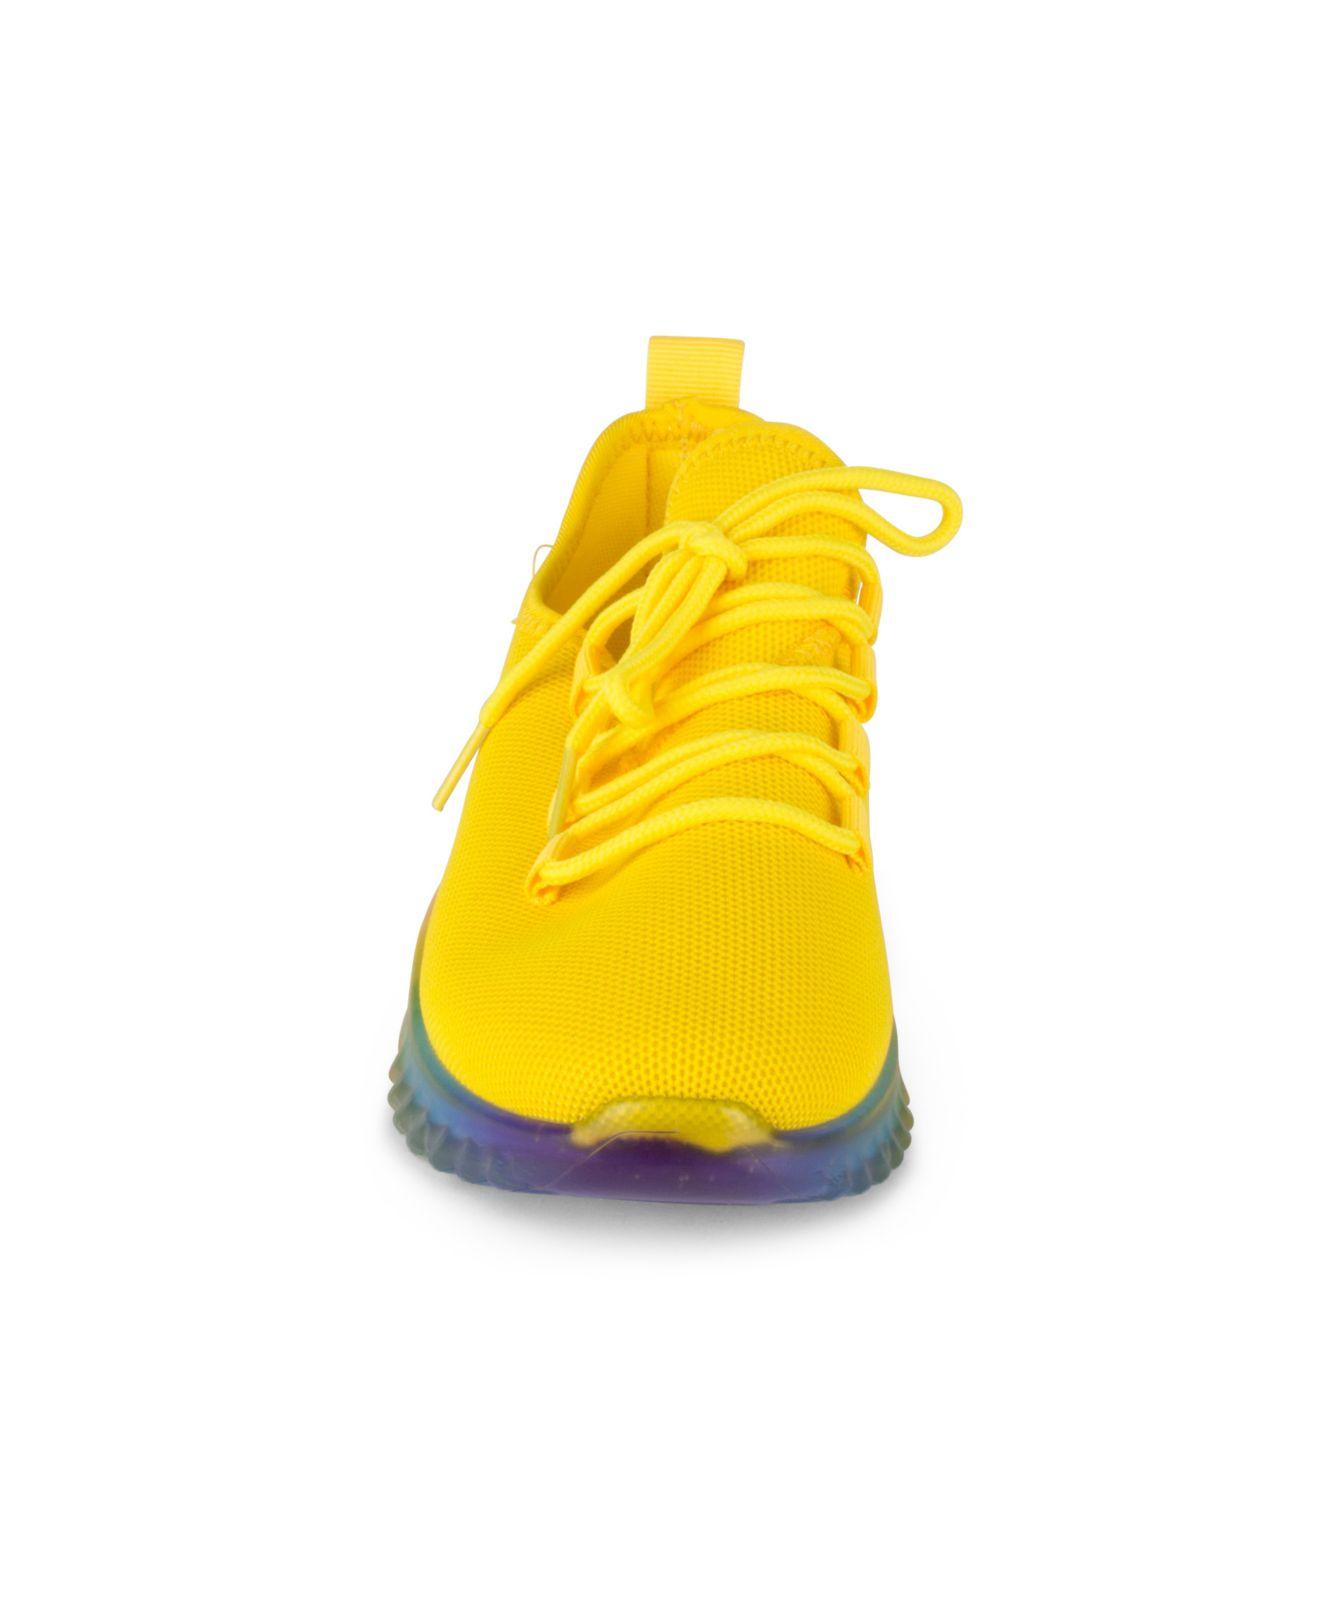 Wanted Affinity Lace Up Rainbow Sole Sneakers in Yellow | Lyst